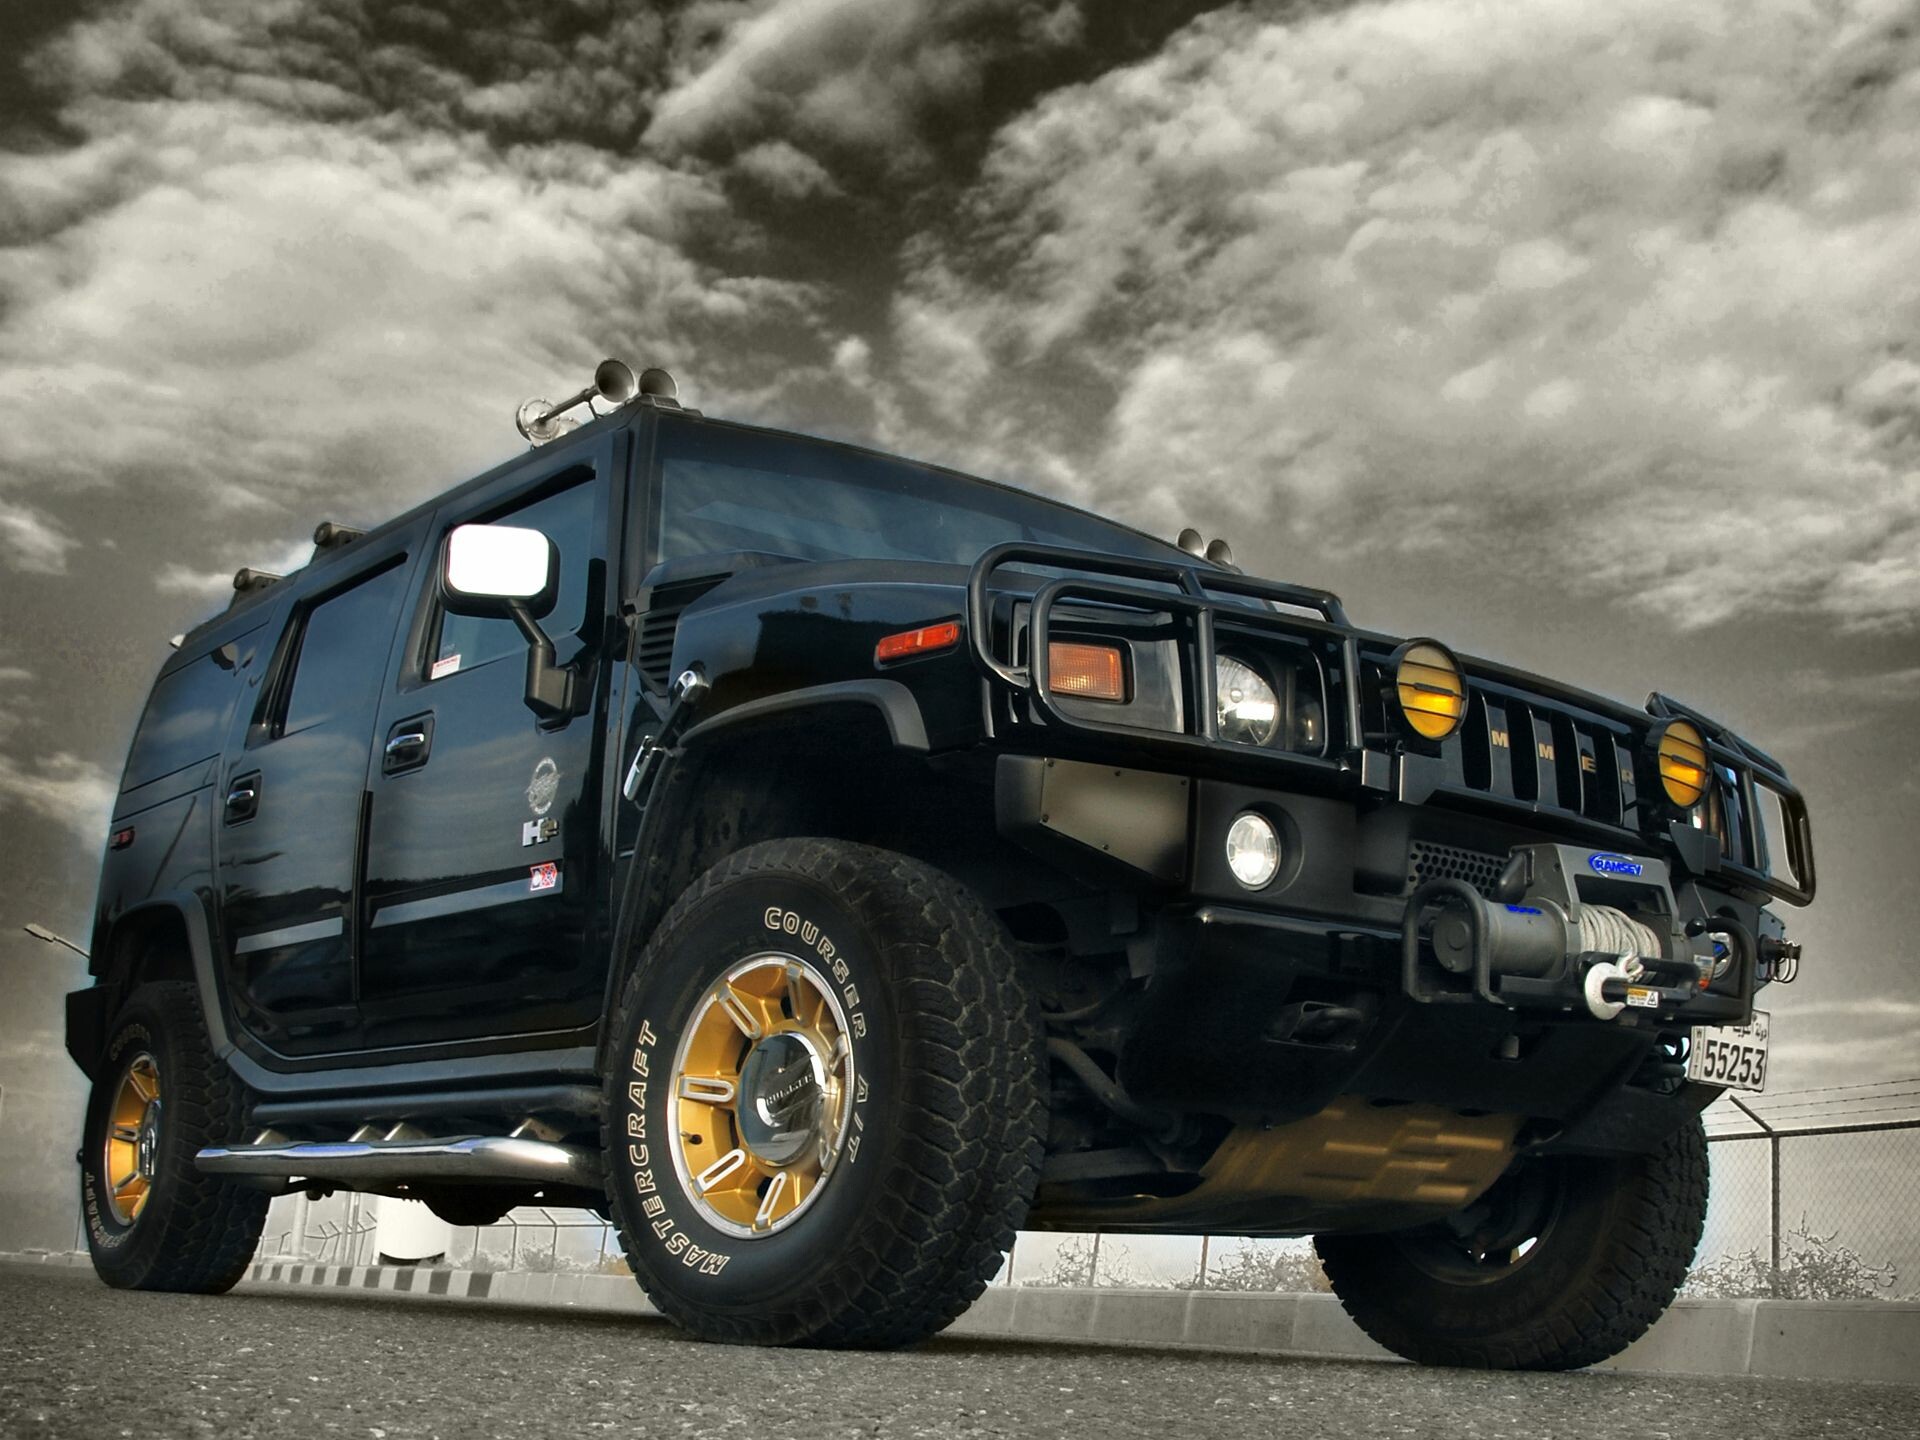 Hummer: H2 model, Based on a modified GMT820 GM three-quarter-ton pickup truck. 1920x1440 HD Background.